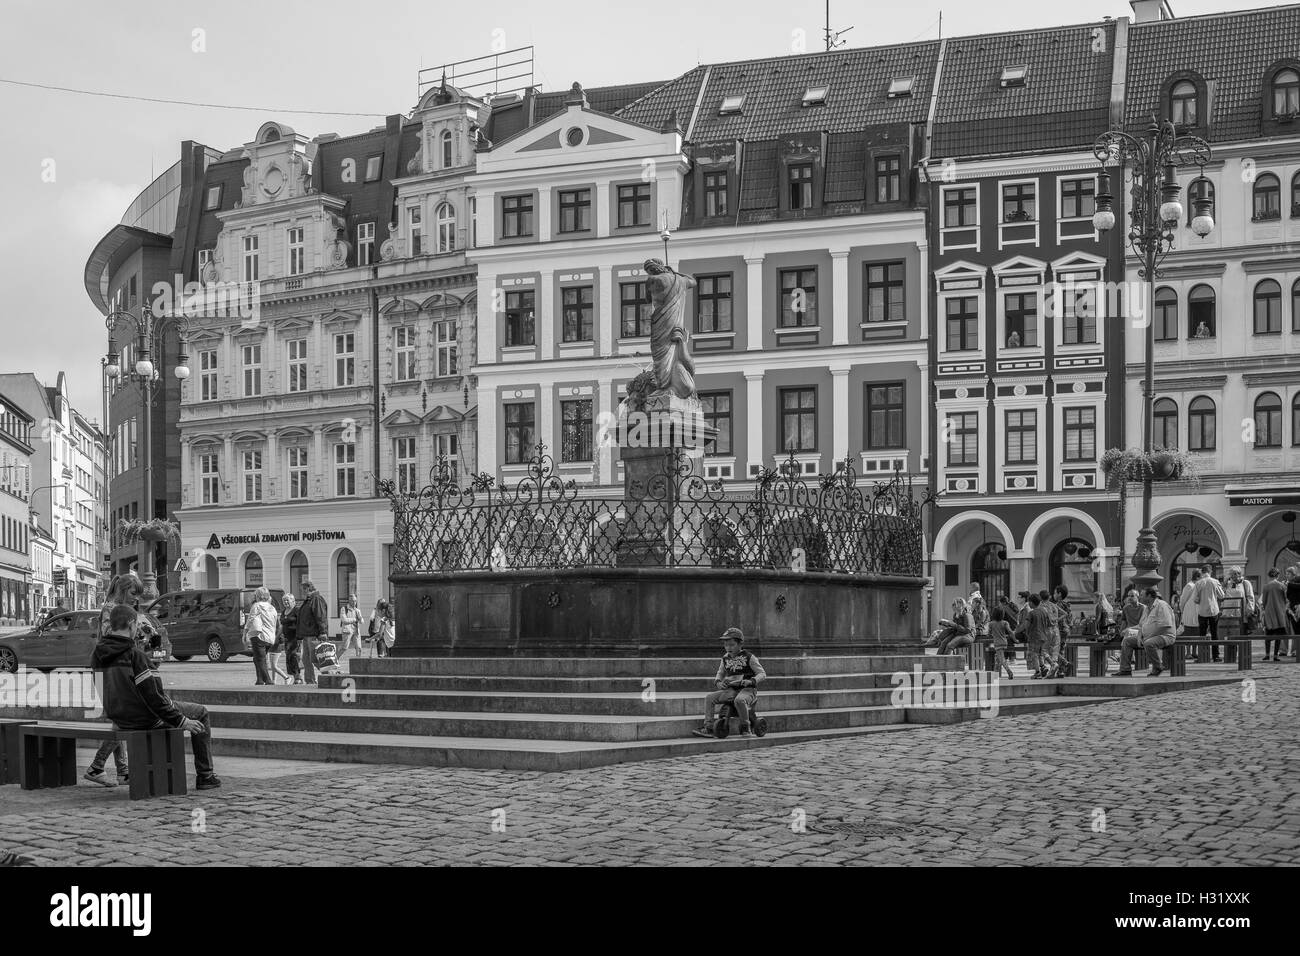 Reichenberg Black and White Stock Photos & Images - Alamy